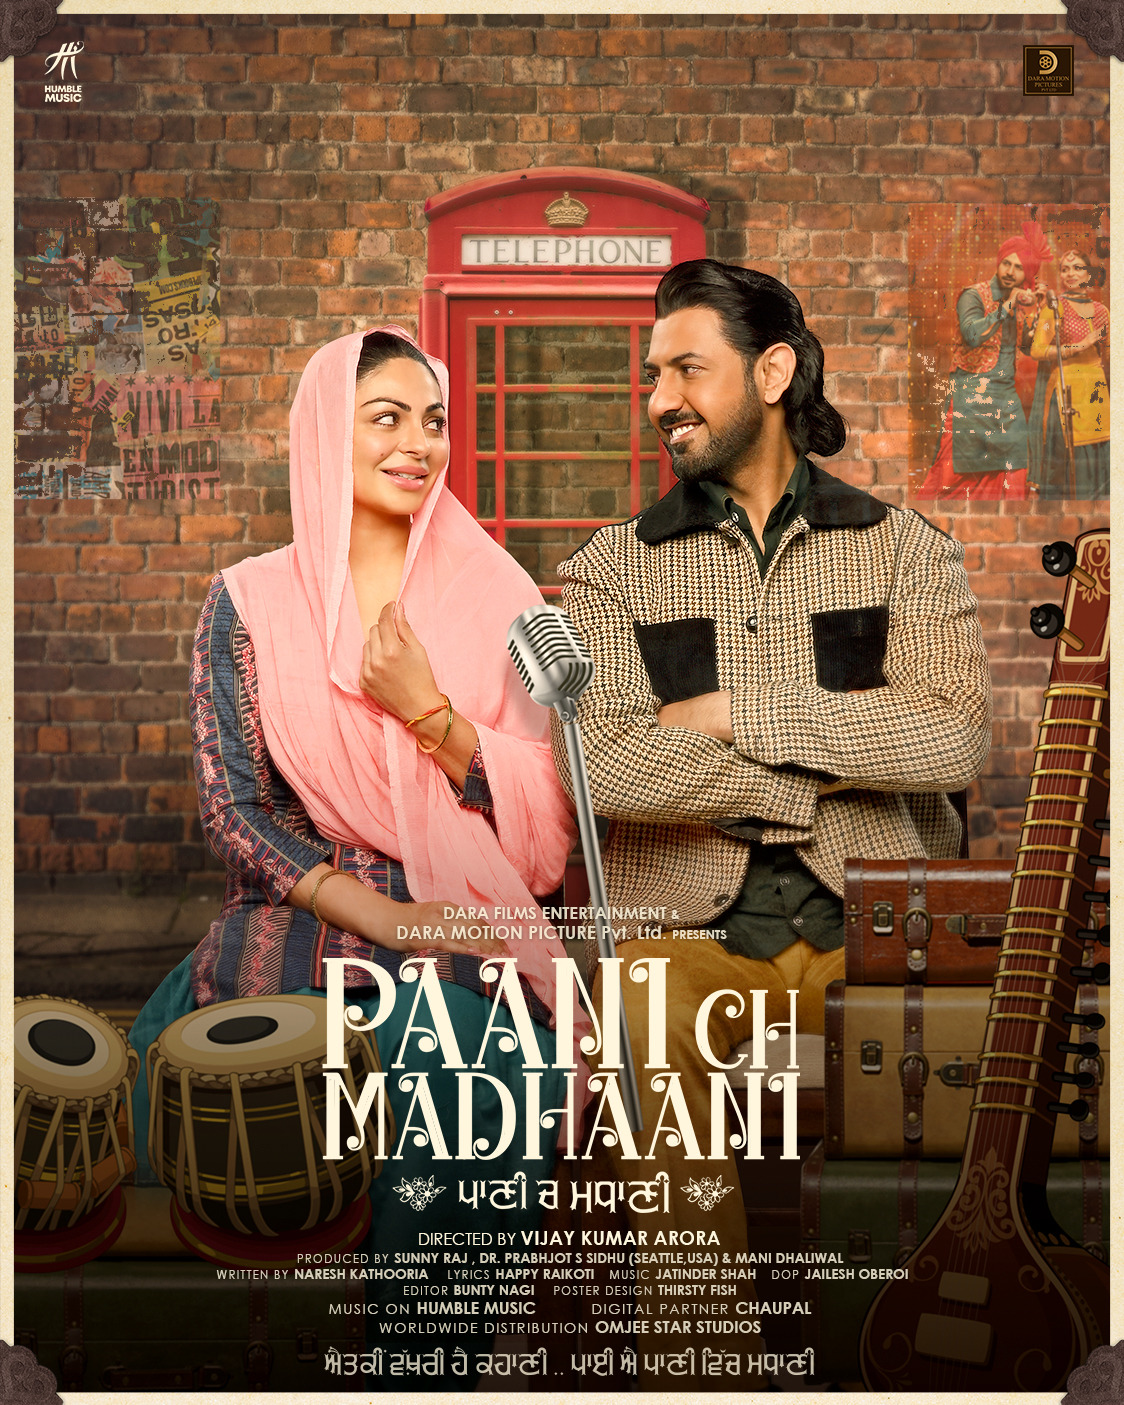 Extra Large Movie Poster Image for Paani Ch Madhaani (#2 of 3)